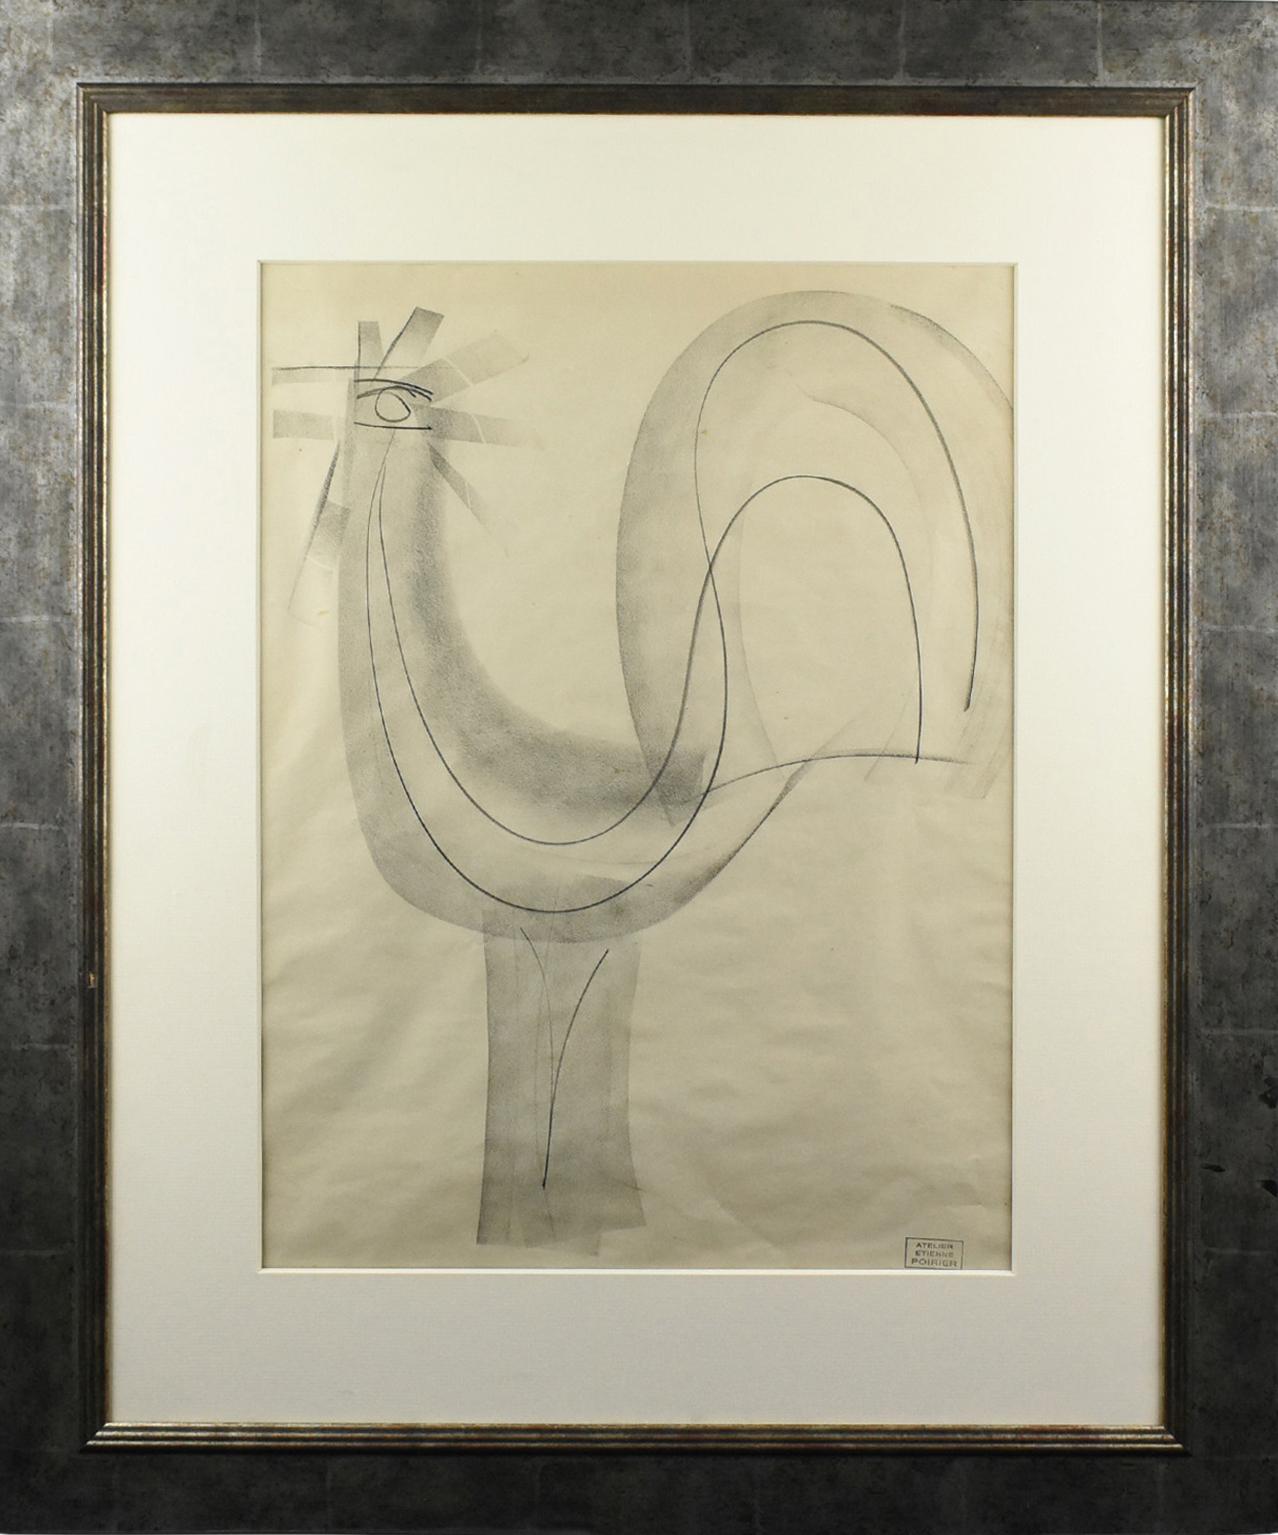 French artist Etienne Poirier (1919-2002) designed this stunning modernist drawing. This work is a charcoal-on-paper composition depicting a proud rooster. This composition is minimalist, as only a few lines create the design.
The minimalist